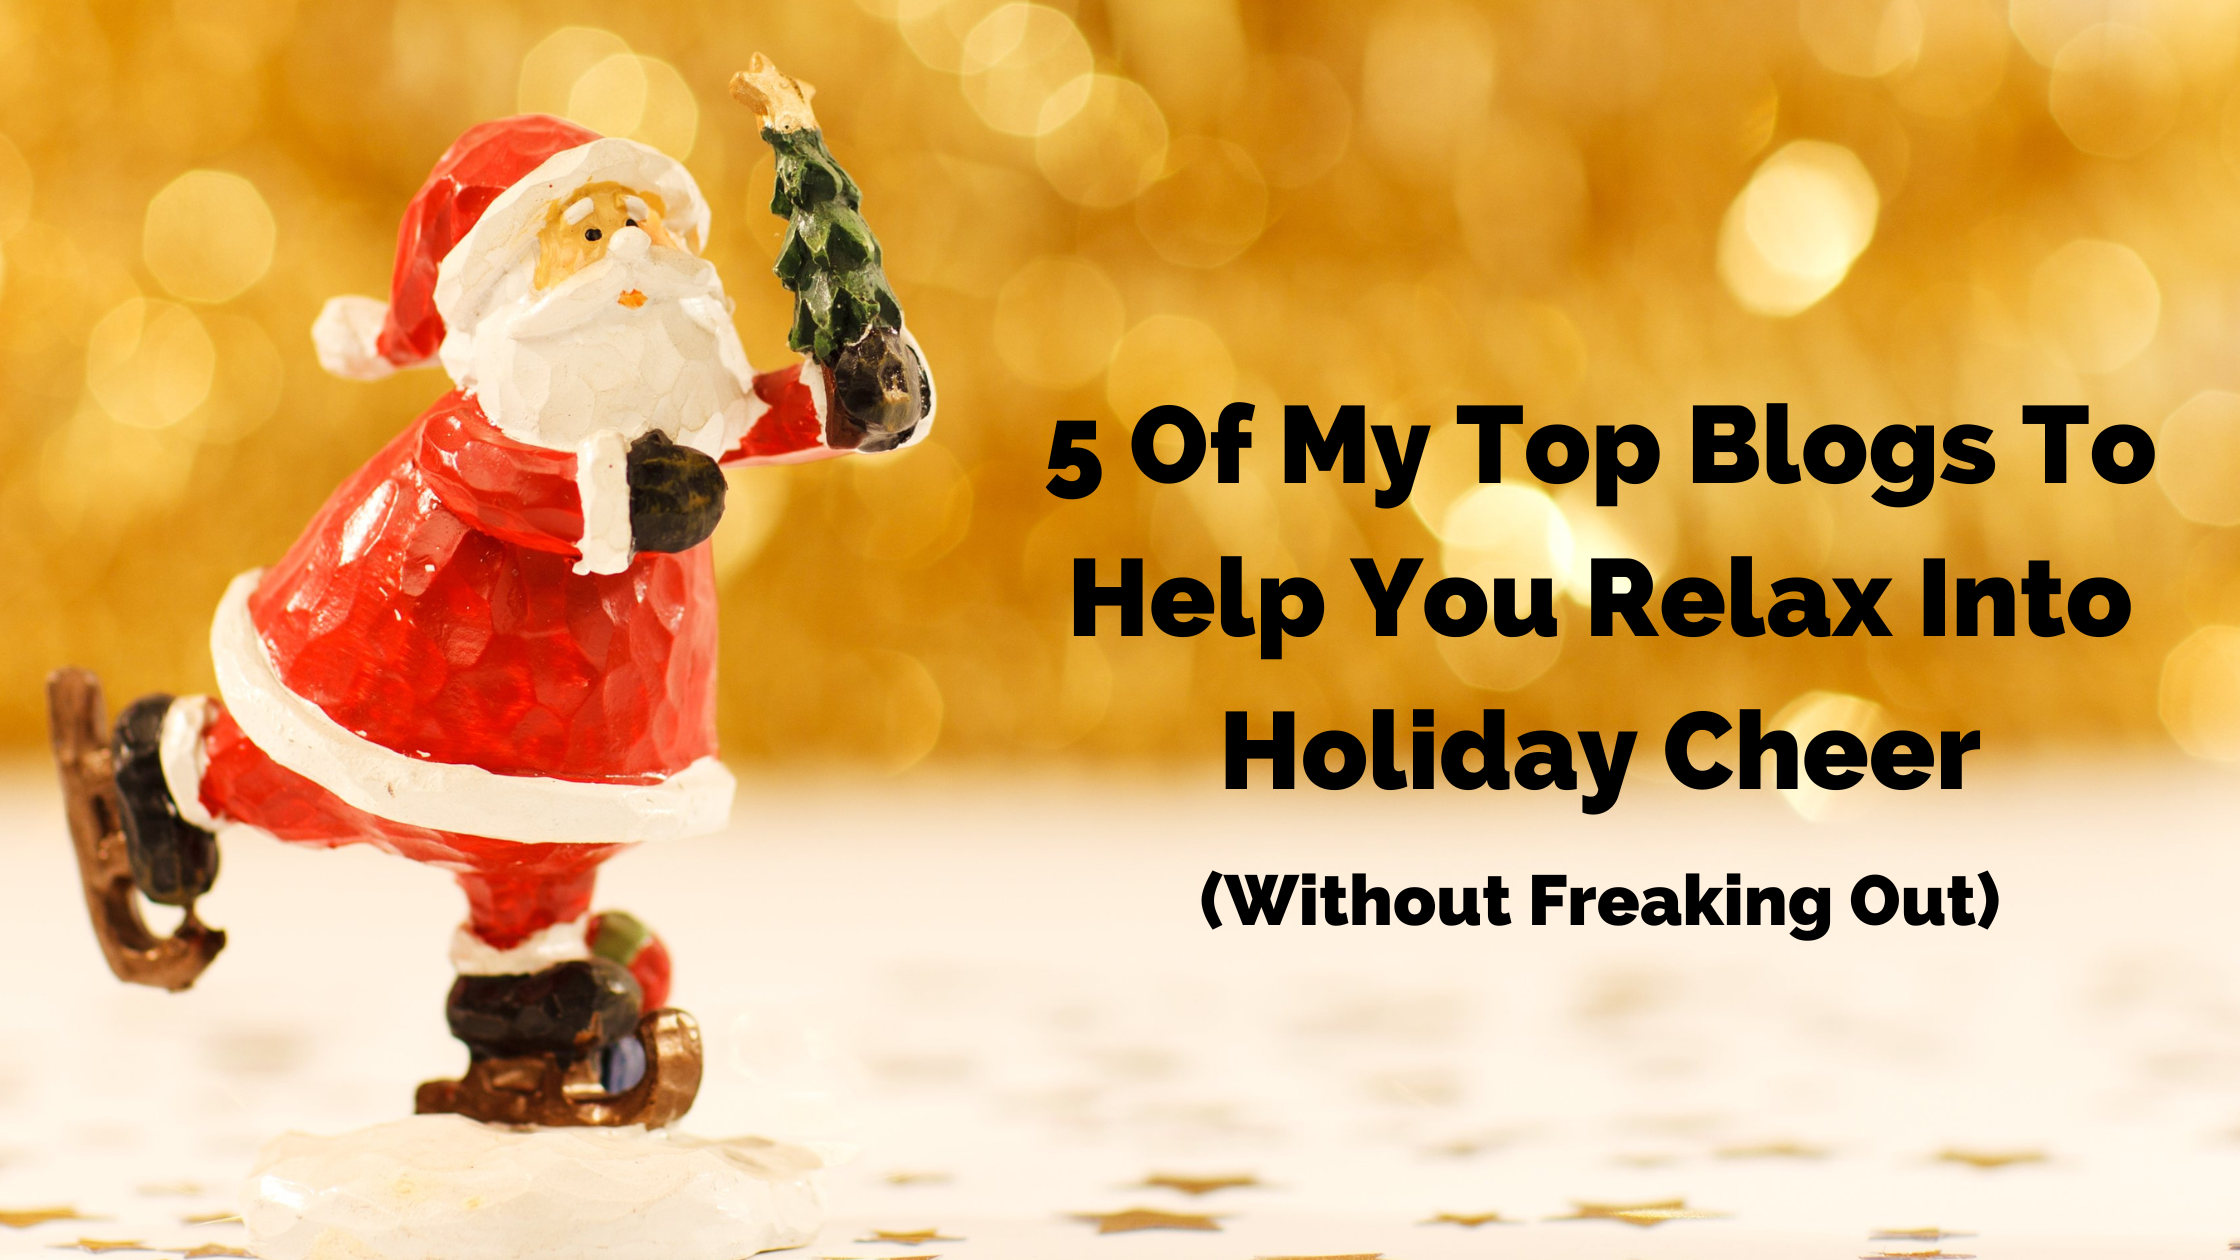 5 Of My Top Blogs To Help You Relax Into Holiday Cheer (Without Freaking Out)